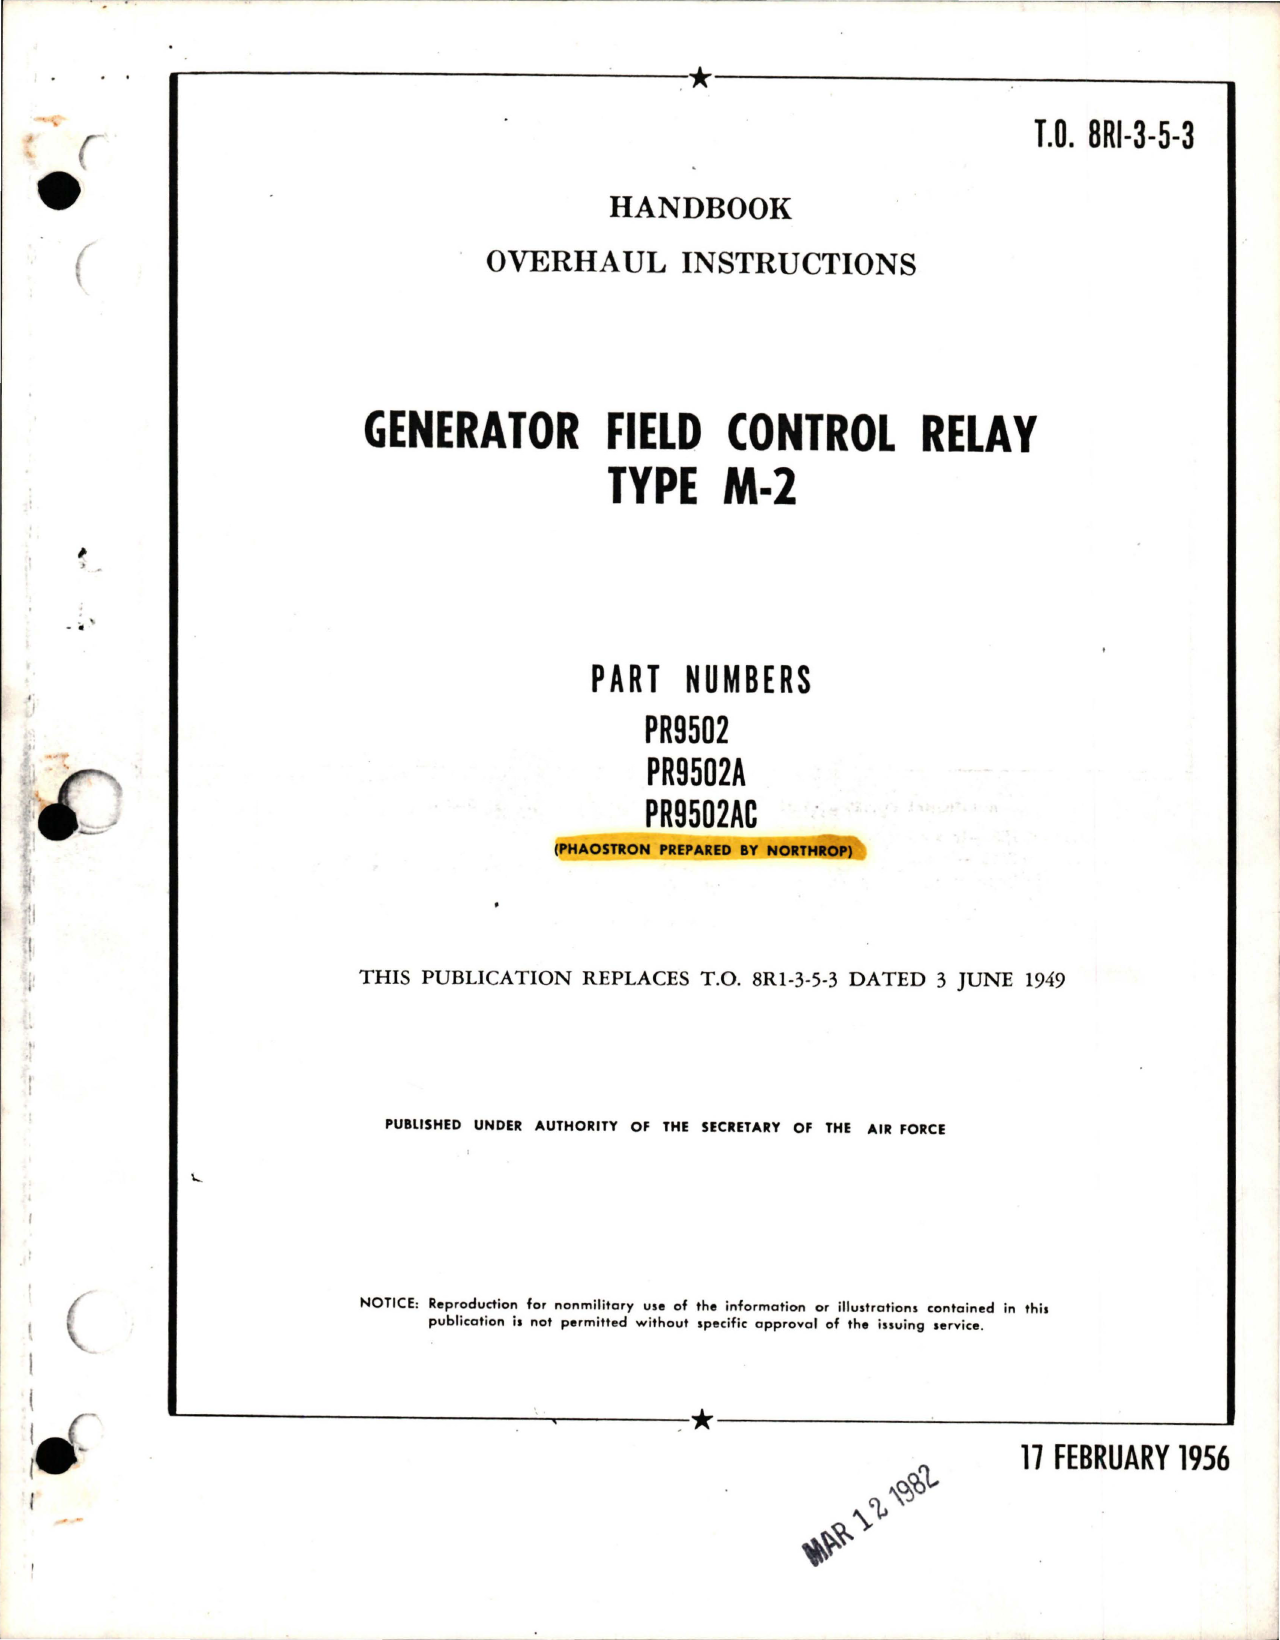 Sample page 1 from AirCorps Library document: Overhaul Instructions for Generator Field Control Relay - Type M-2 - Parts PR9502, PR9502A, and PR9502AC